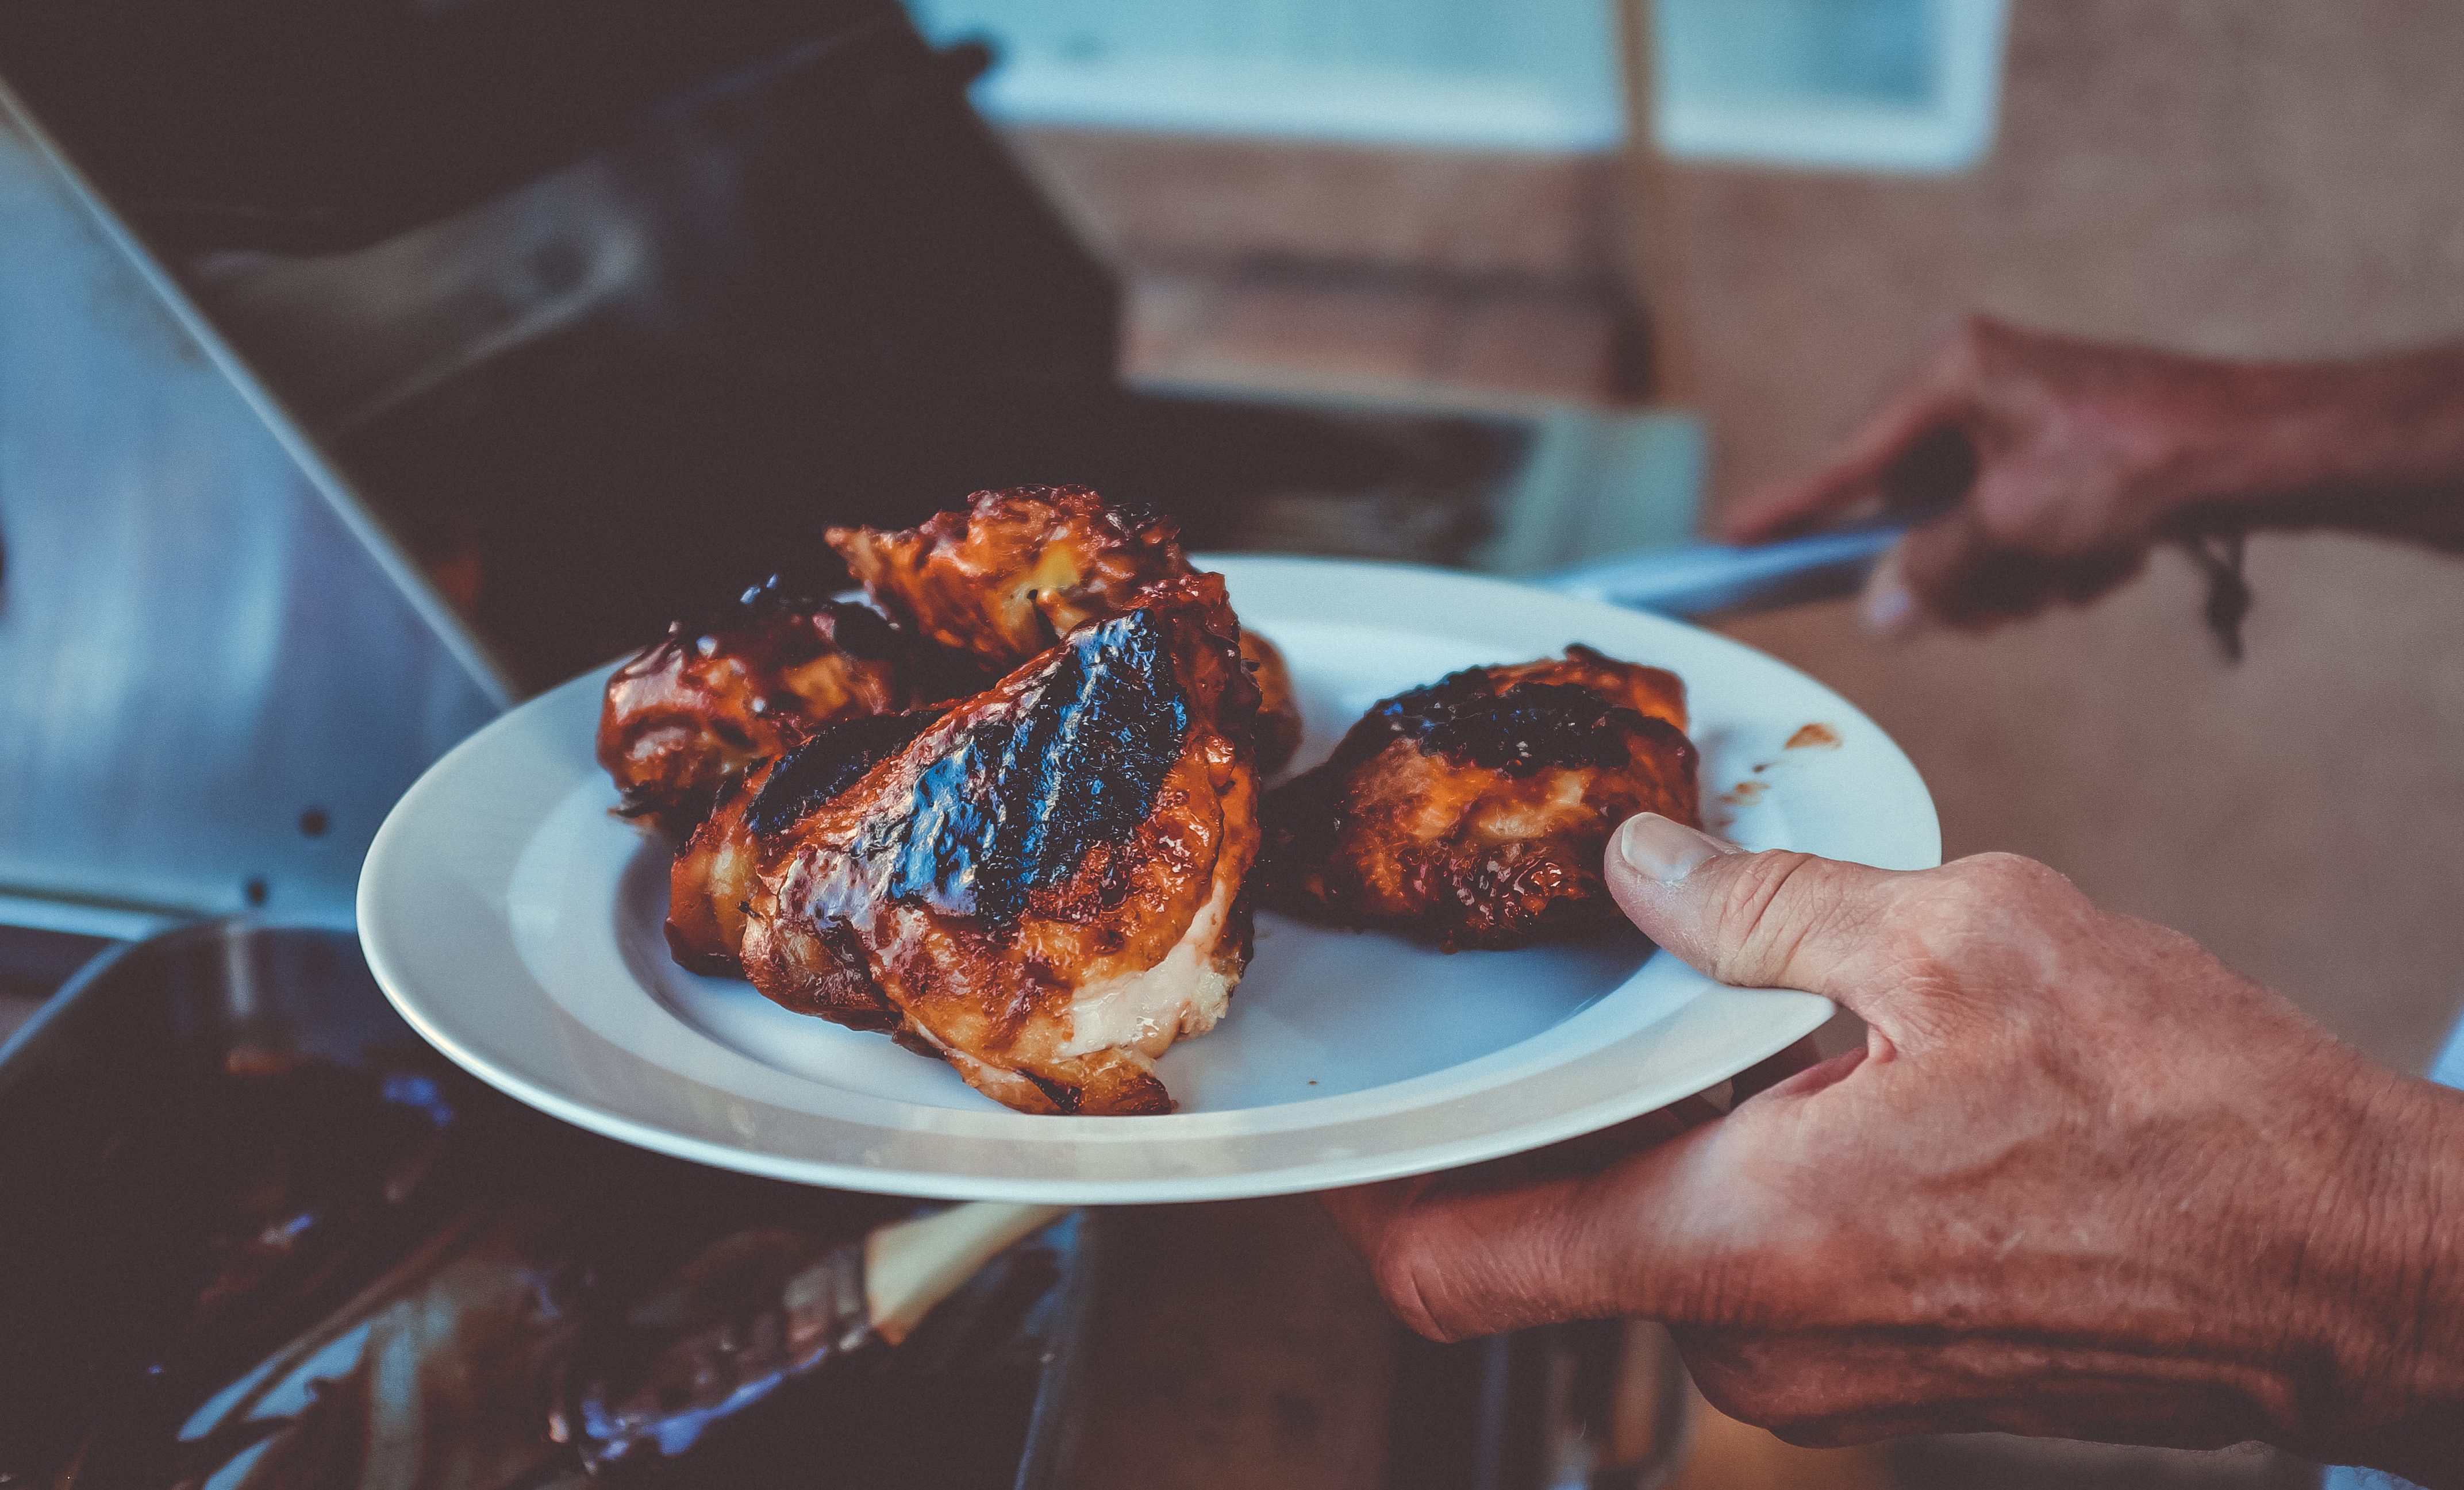  Whether Chicken, Lamb, Beef, or Veal, bone-in will take a little longer to cook but will retain moisture and provide more flavor when grilled. Checking the internal temperature with a probe thermometer in the thickest part of the meat, not touching the bone is imperative.